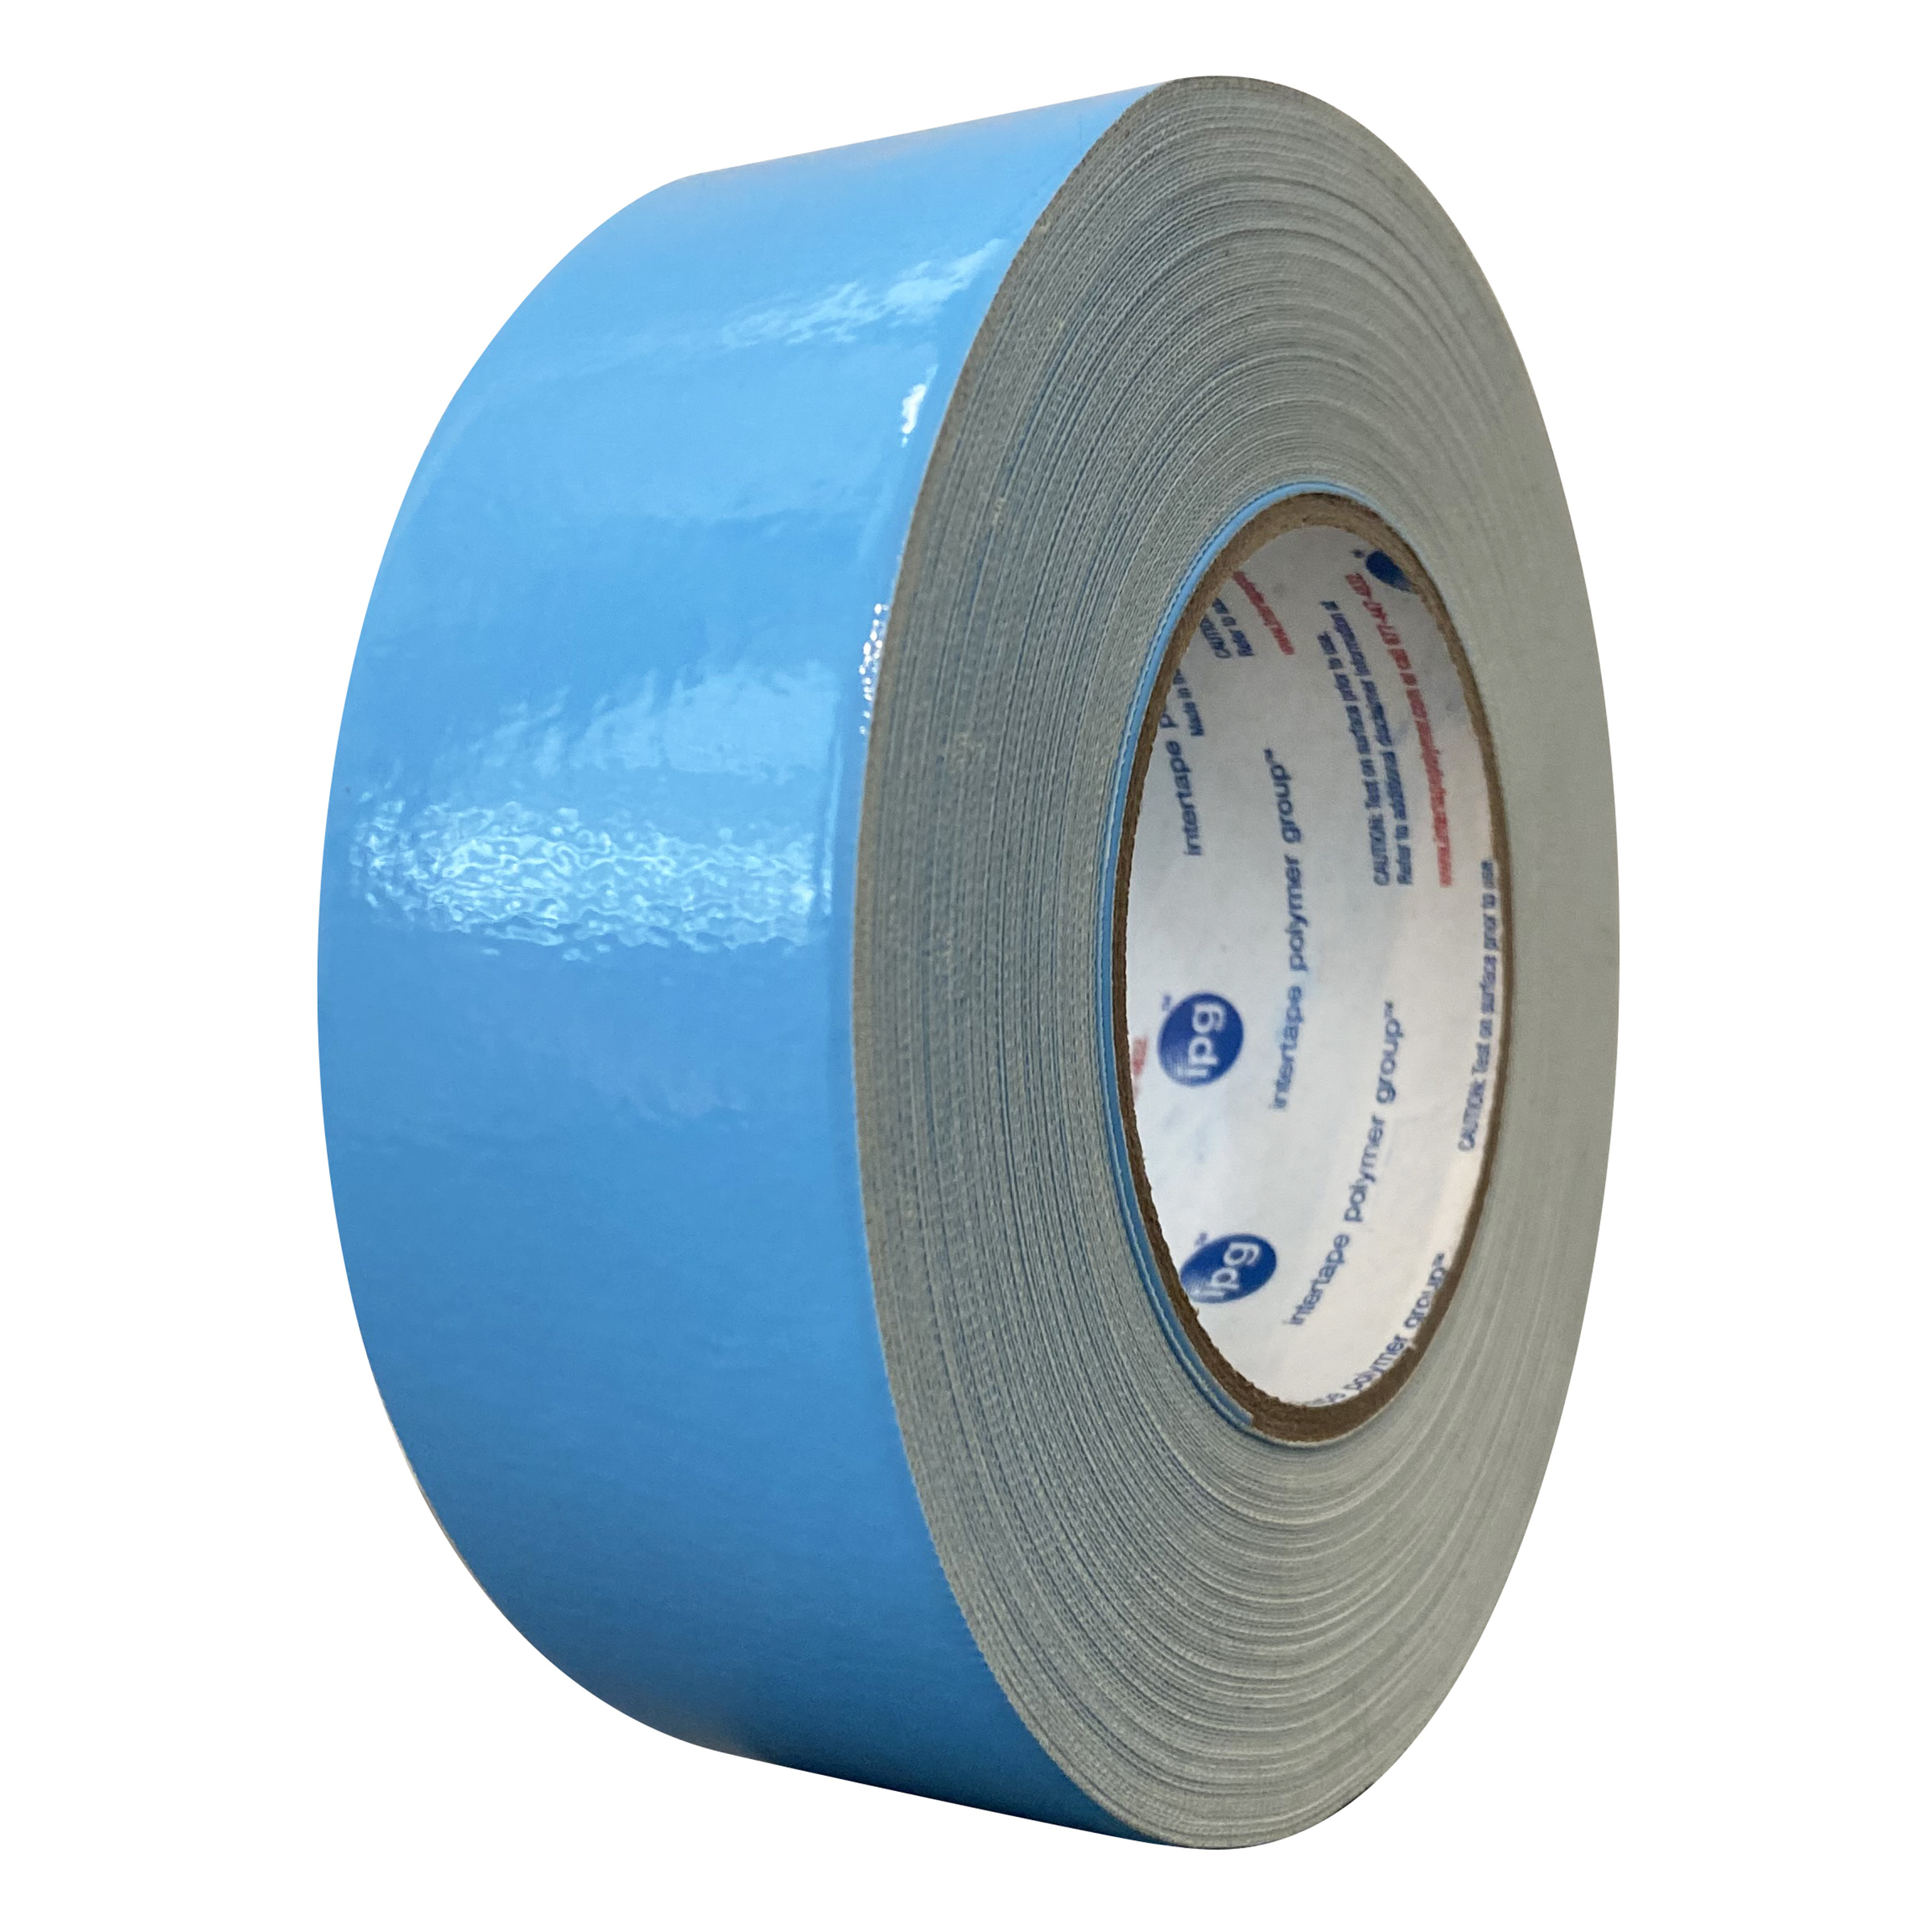 Carpet Tape: What Is It? How Is It Made? Uses, Application